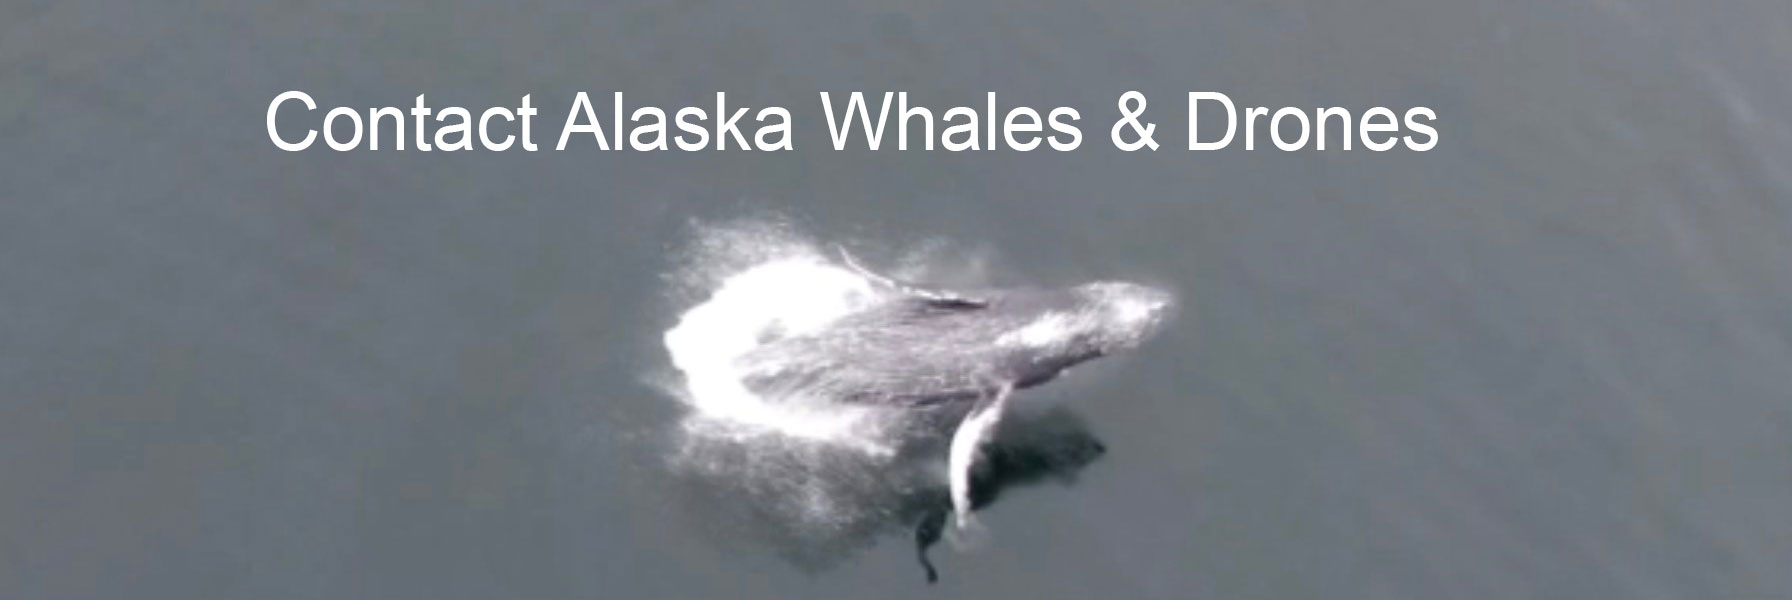 Alaska Whales & Drones offers a unique personalized whale watching tour from Hoonah, Alaska.